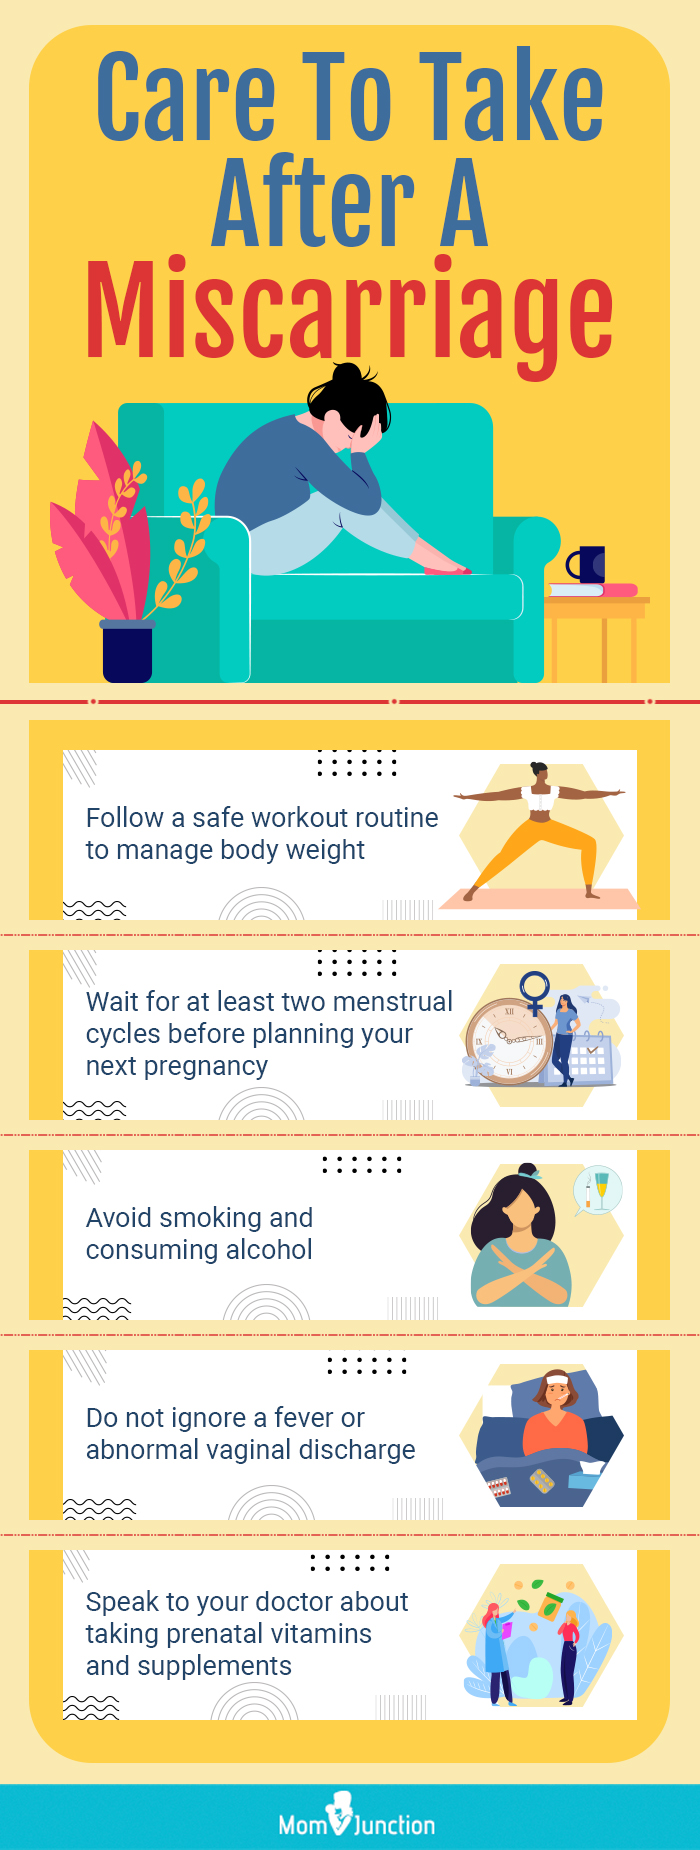 care to take after a miscarriage (infographic)